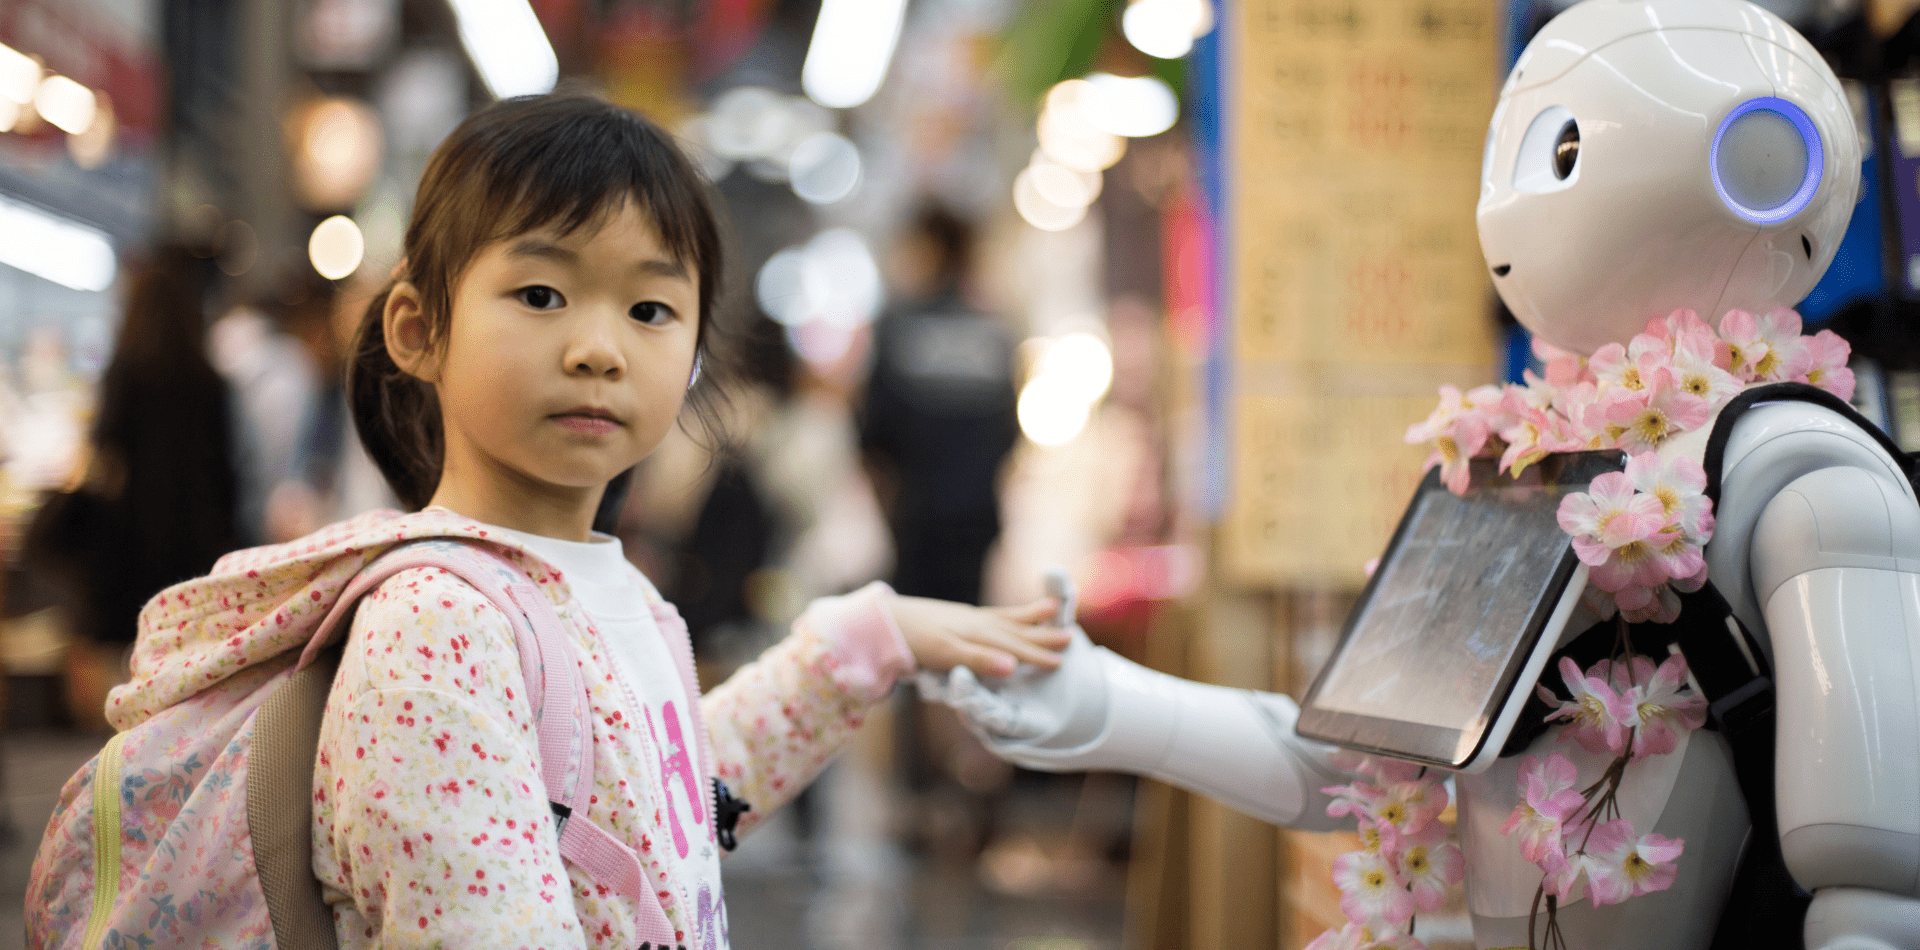 Girl shaking hands with Robot